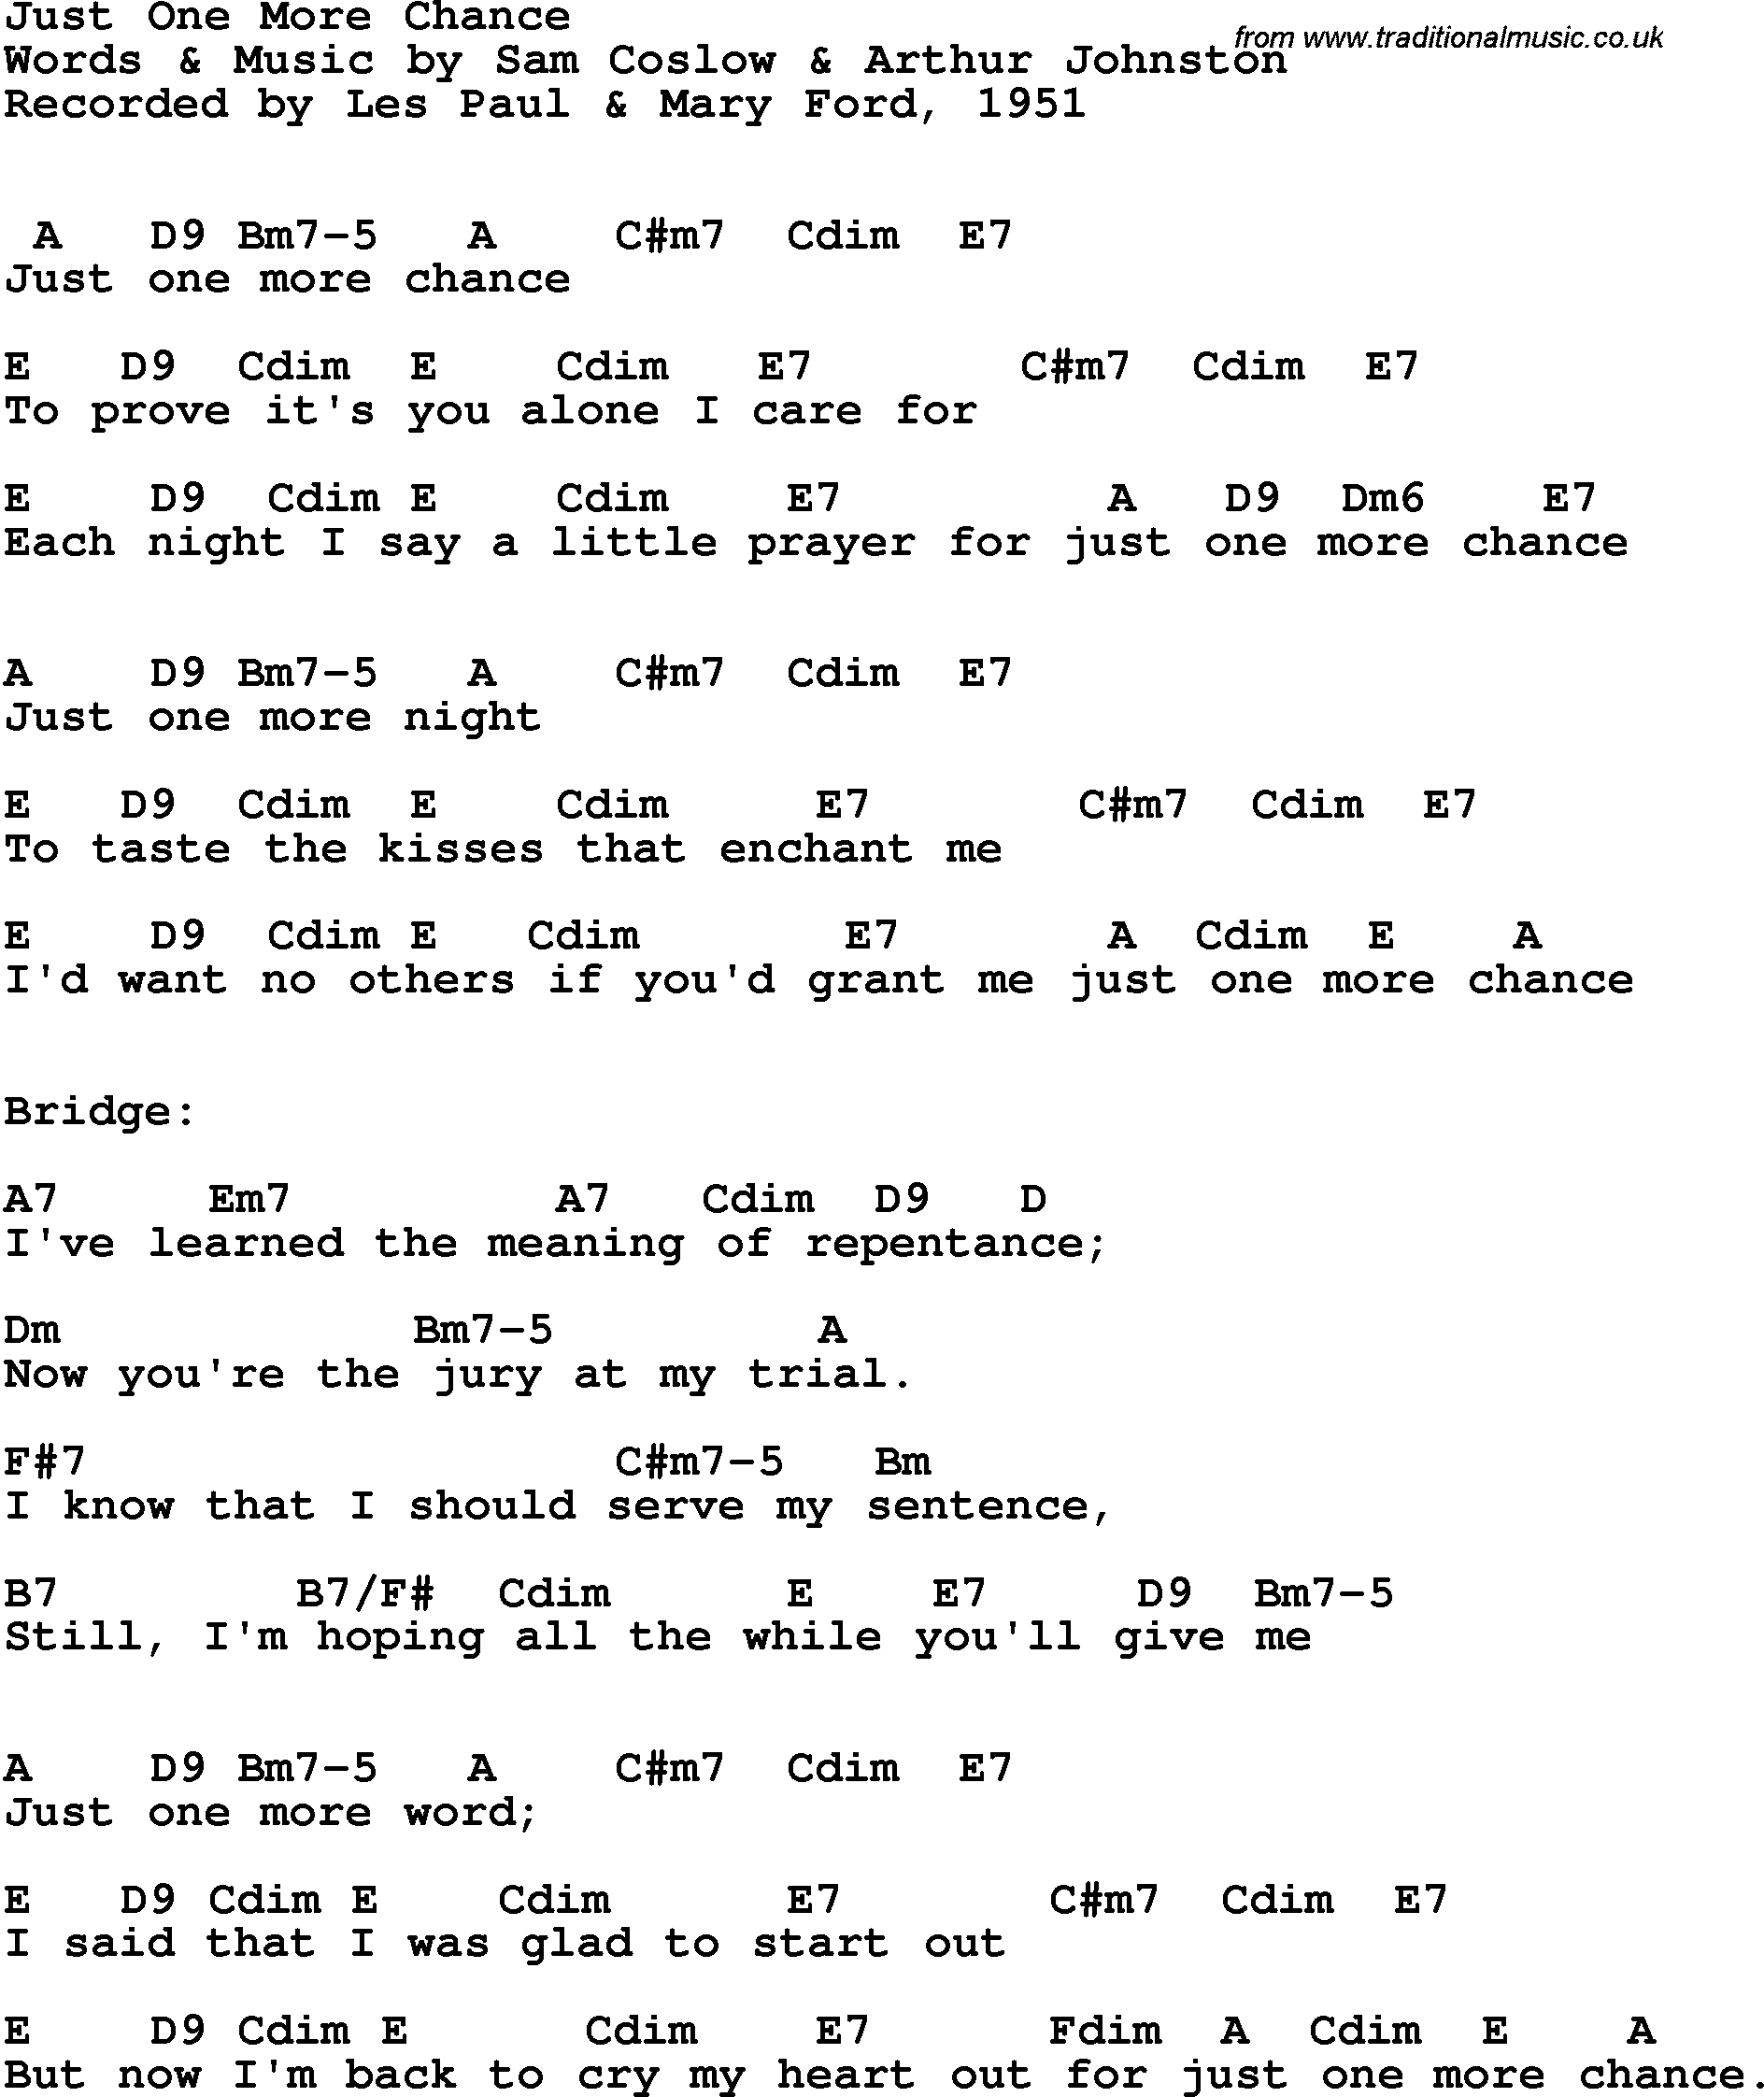 Song Lyrics with guitar chords for Just One More Chance - Les Paul & Mary Ford, 1951